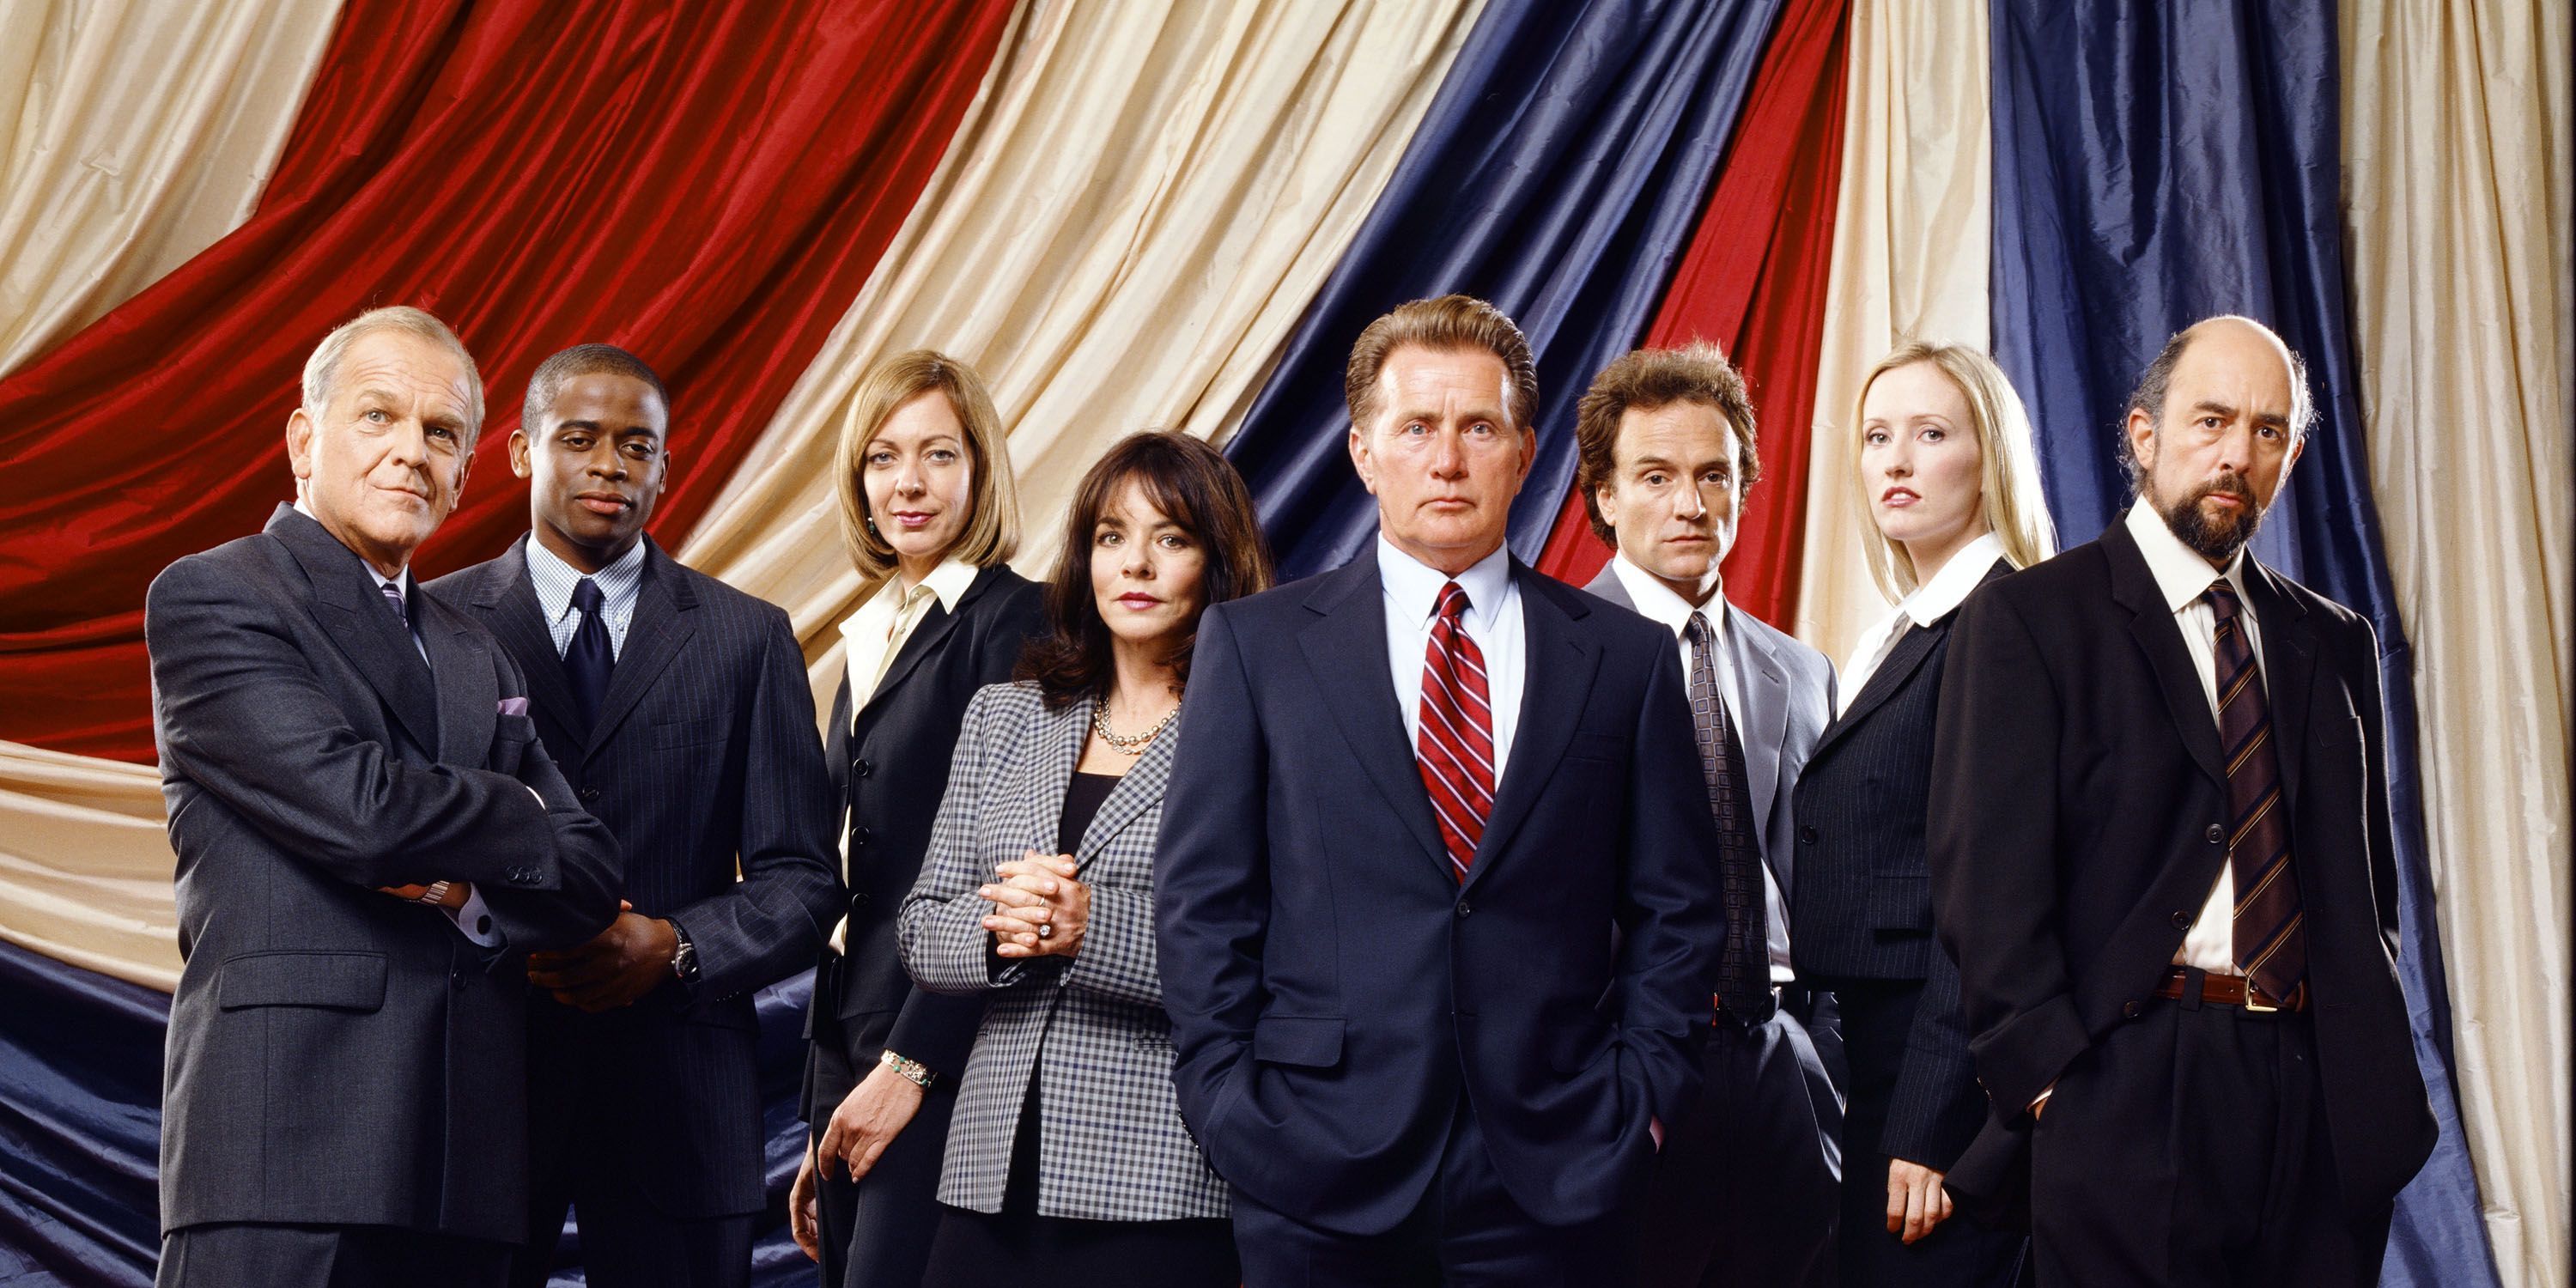 The West Wing cast in front of a red, white and blue curtain